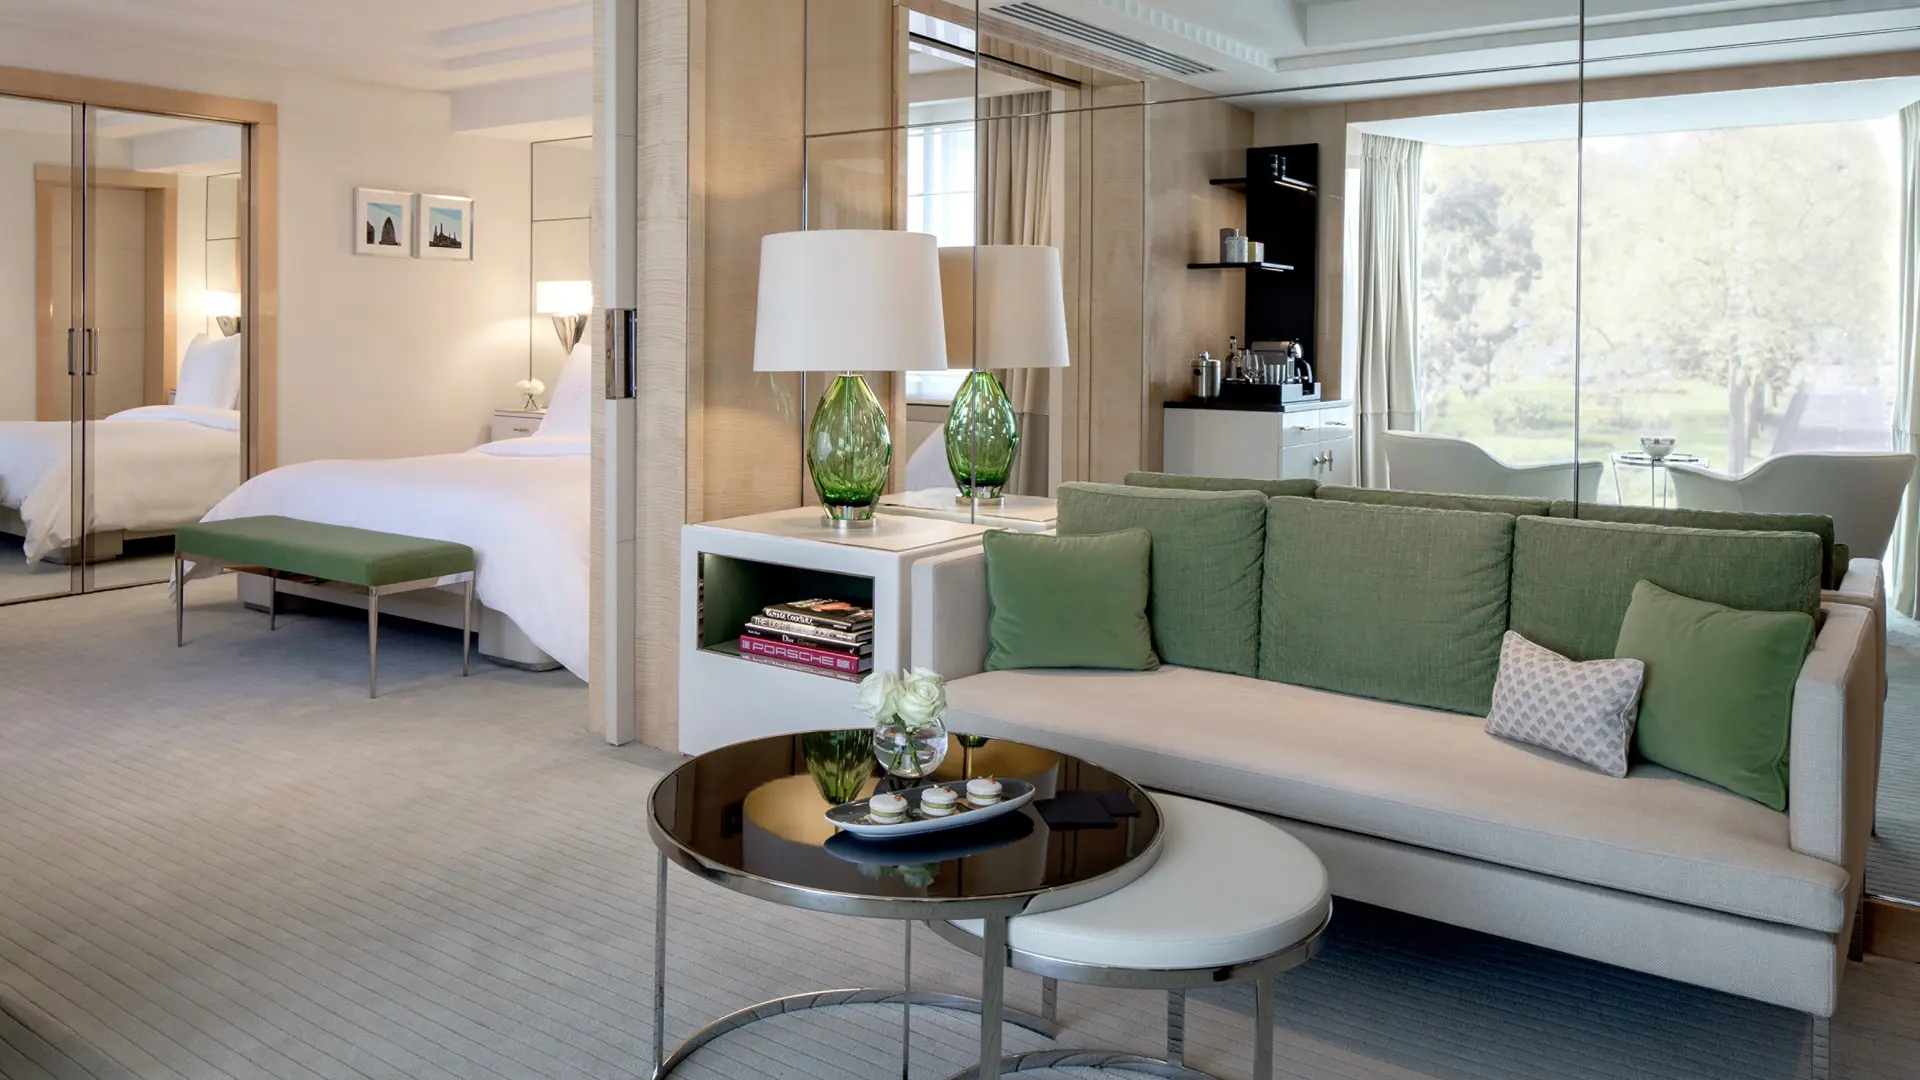 Hotel review Accommodation' - Four Seasons Hotel London at Park Lane - 6